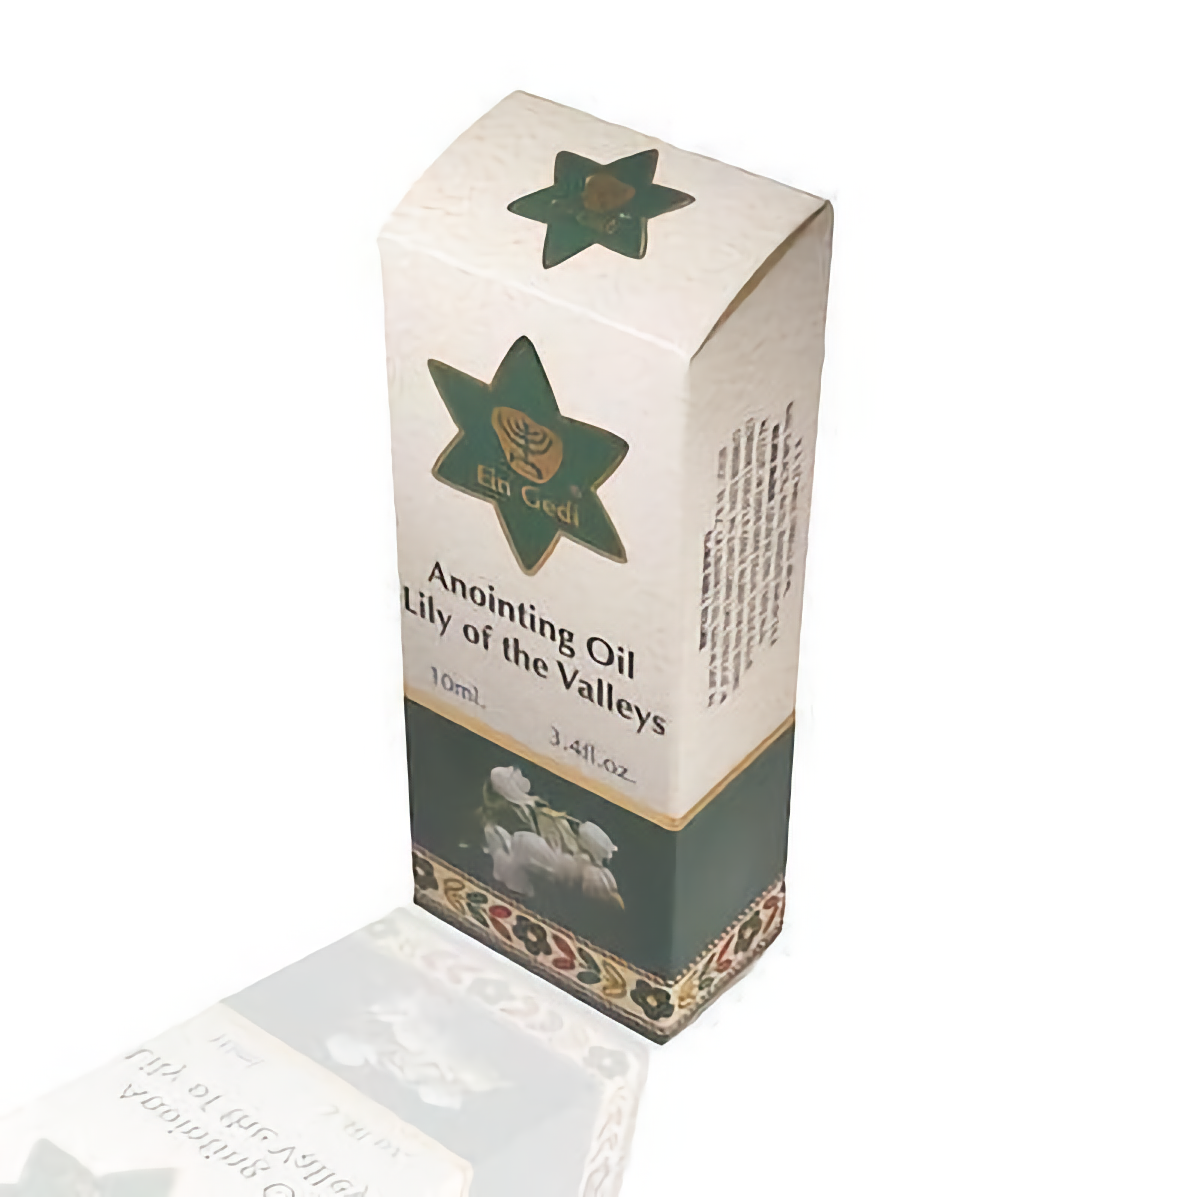 Buy Anointing Oil Essence Of Jerusalem Lily Of The Valleys (30 ml)